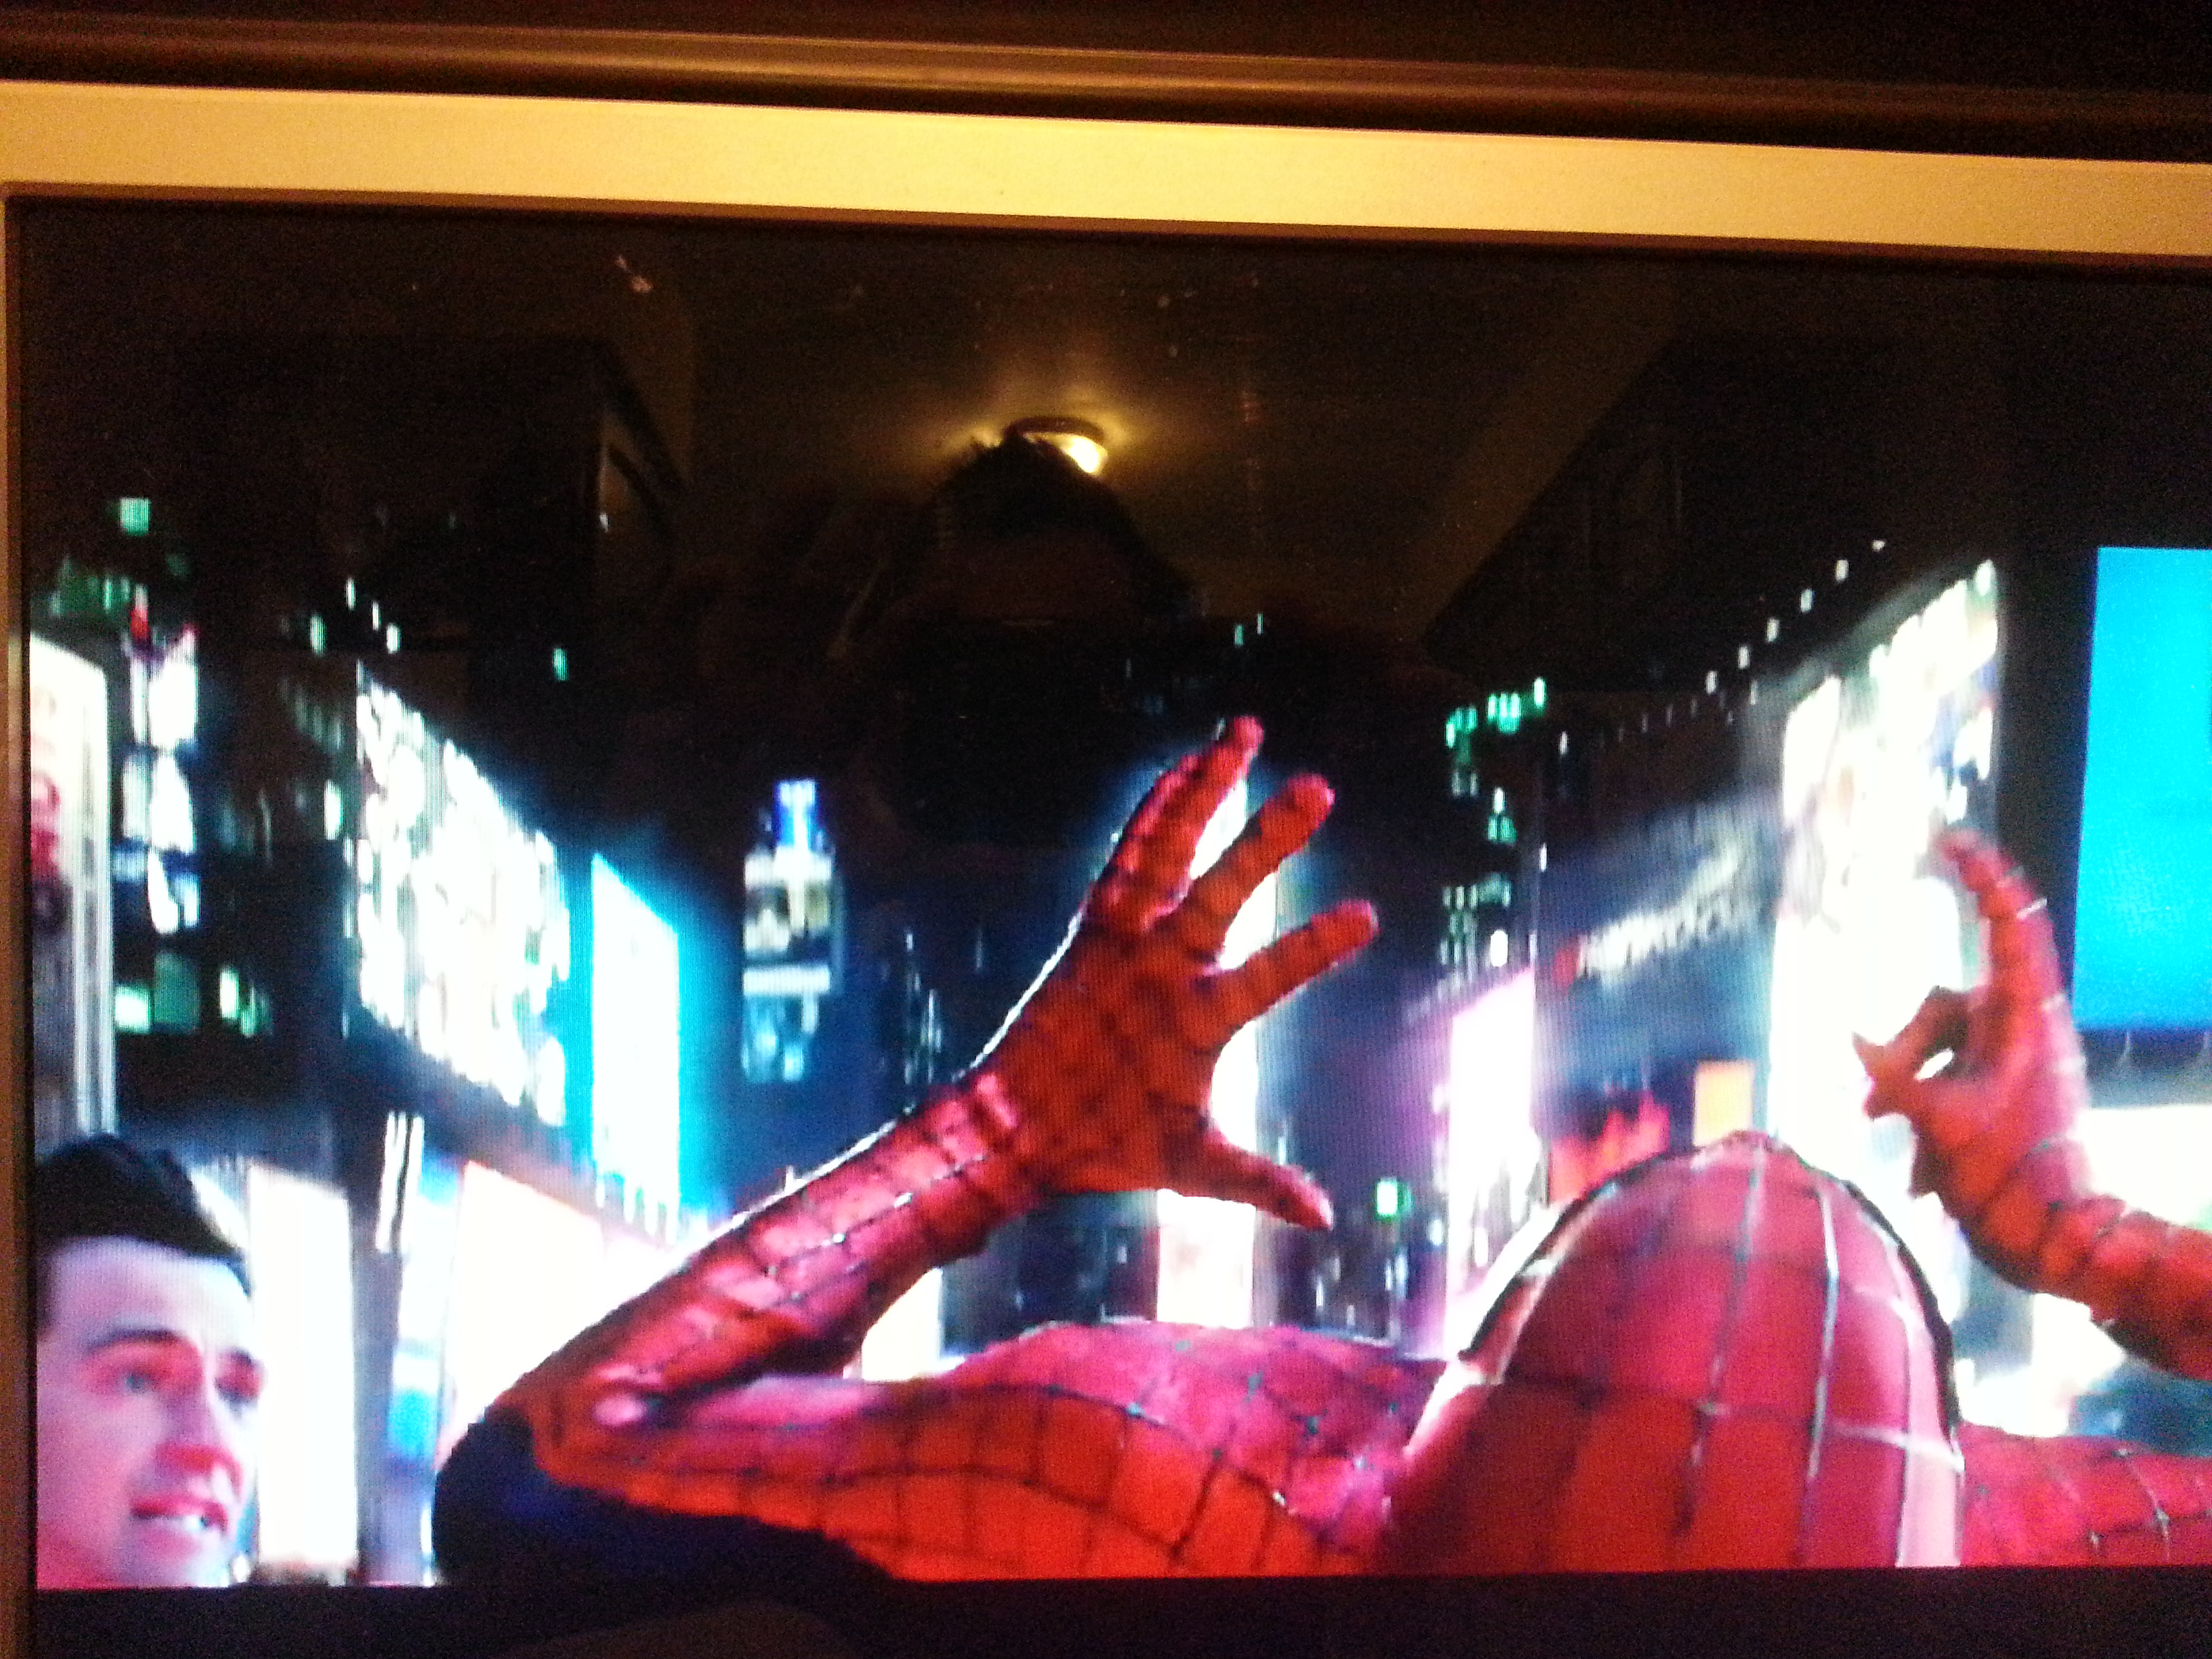 Screen shot from The Amazing Spider-man 2